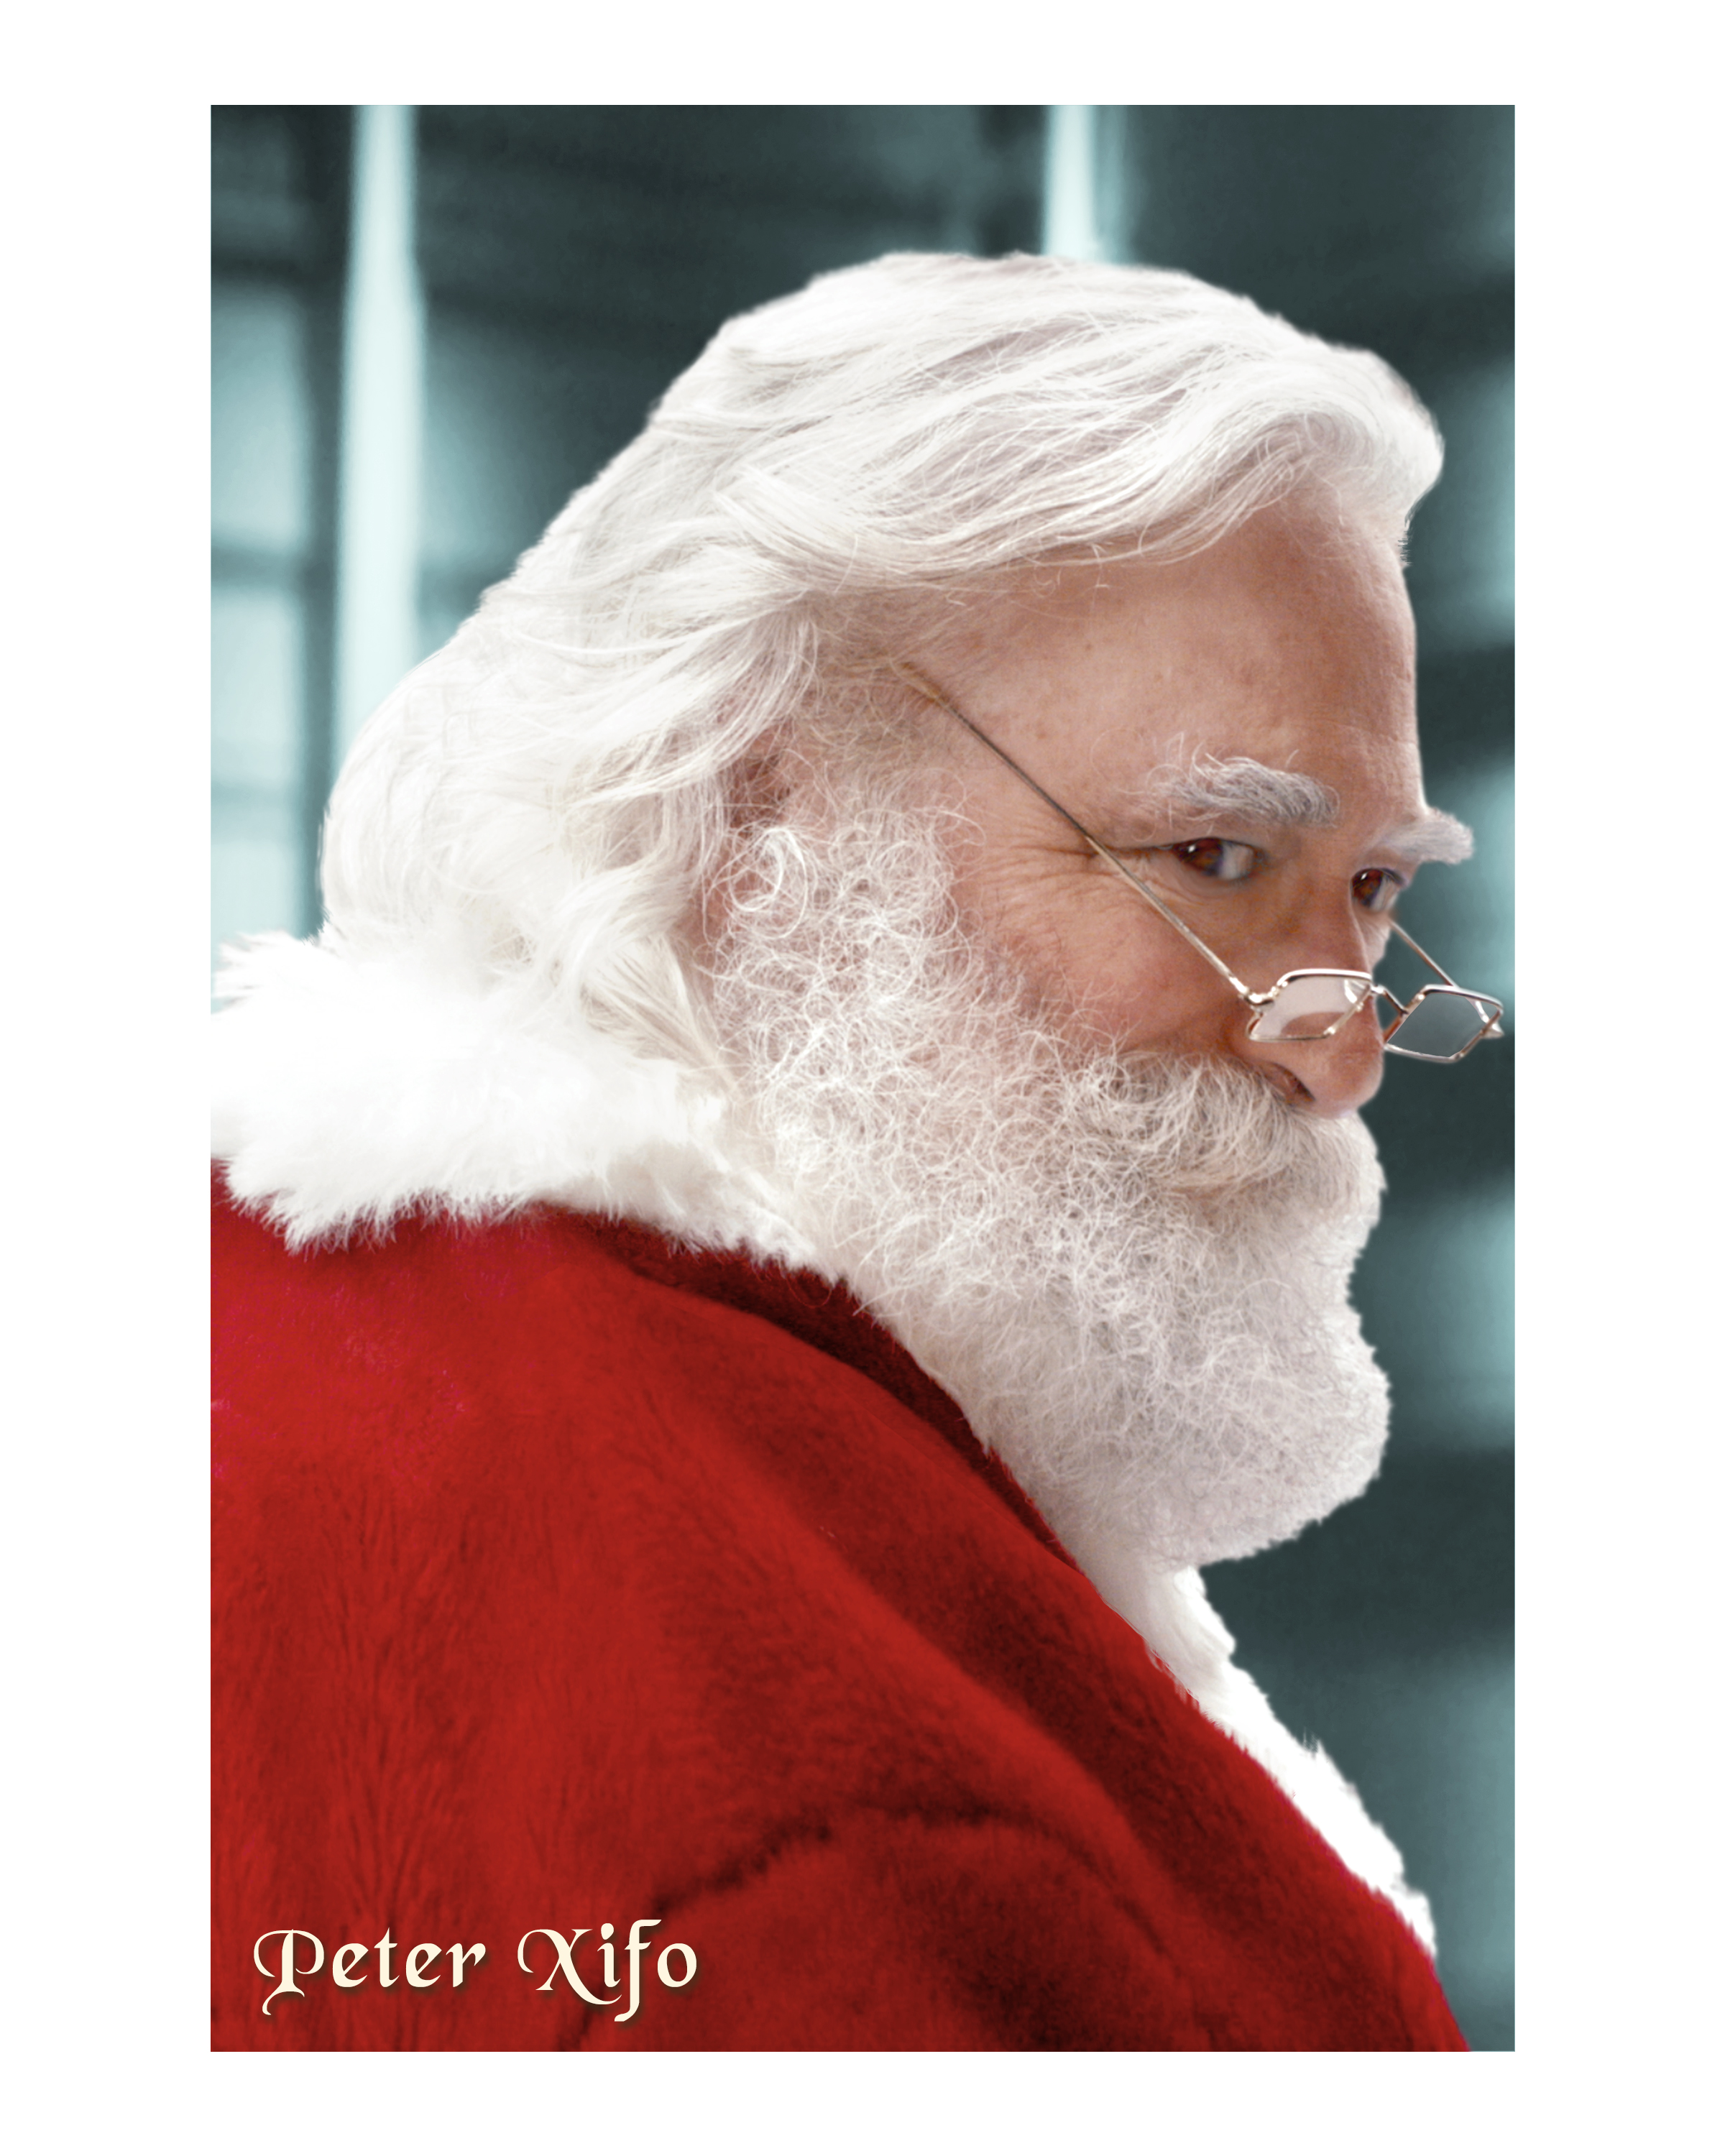 Peter Xifo as Santa from the Mercedes Benz Christmas ads. Pete has been Mercedes' Exclusive TV Santa in the US for their holiday commercials since 2010.